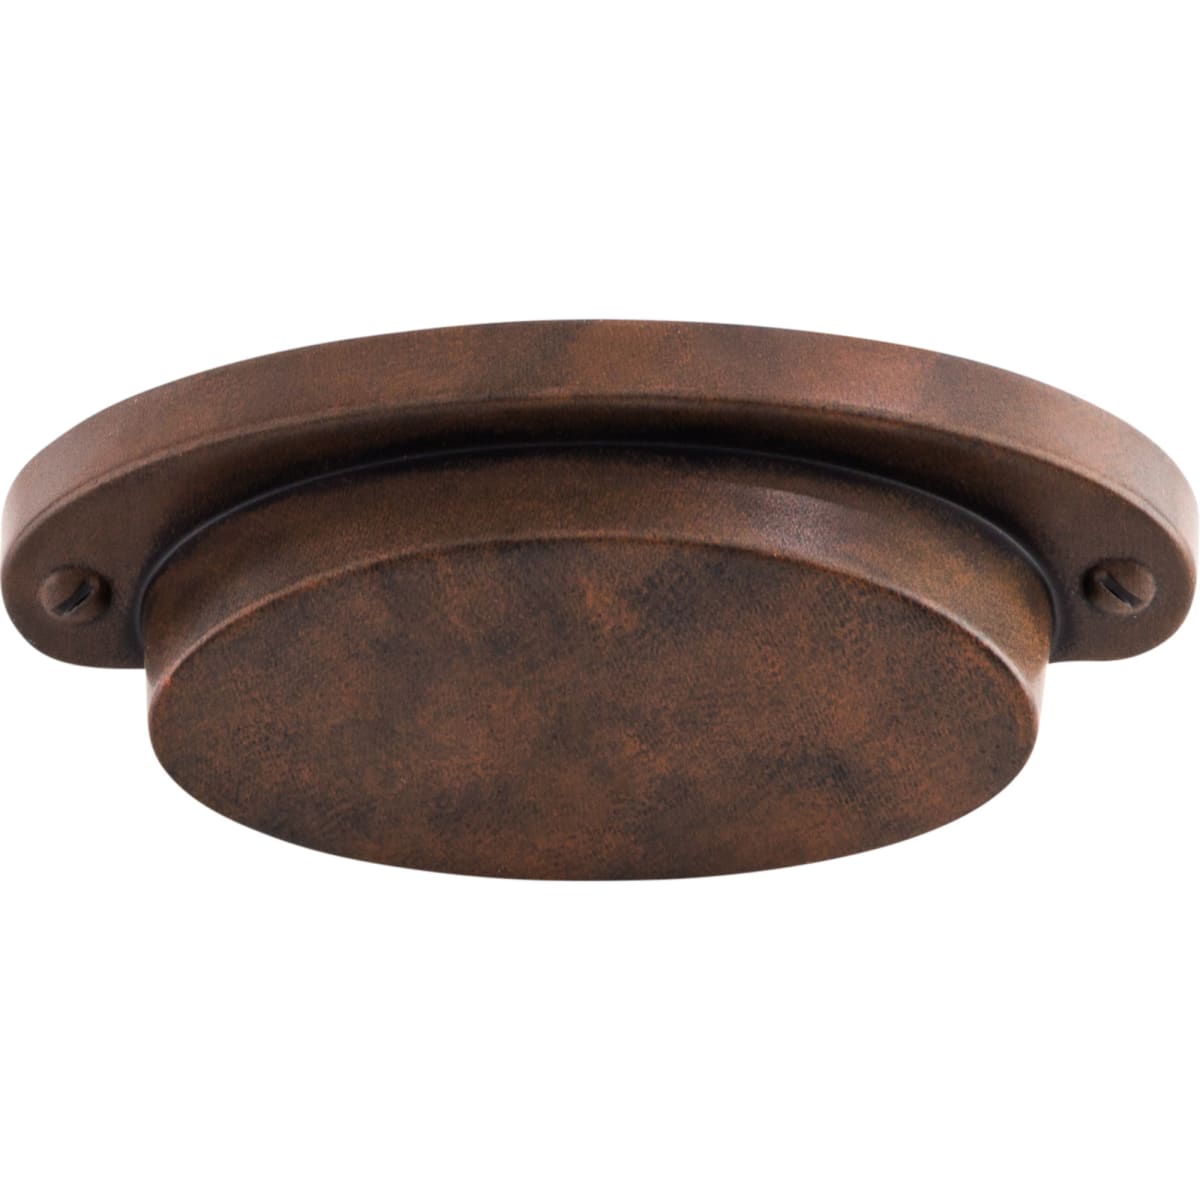 Channing Cup Pull Honey Bronze - 3 3/4 in - Handles & More